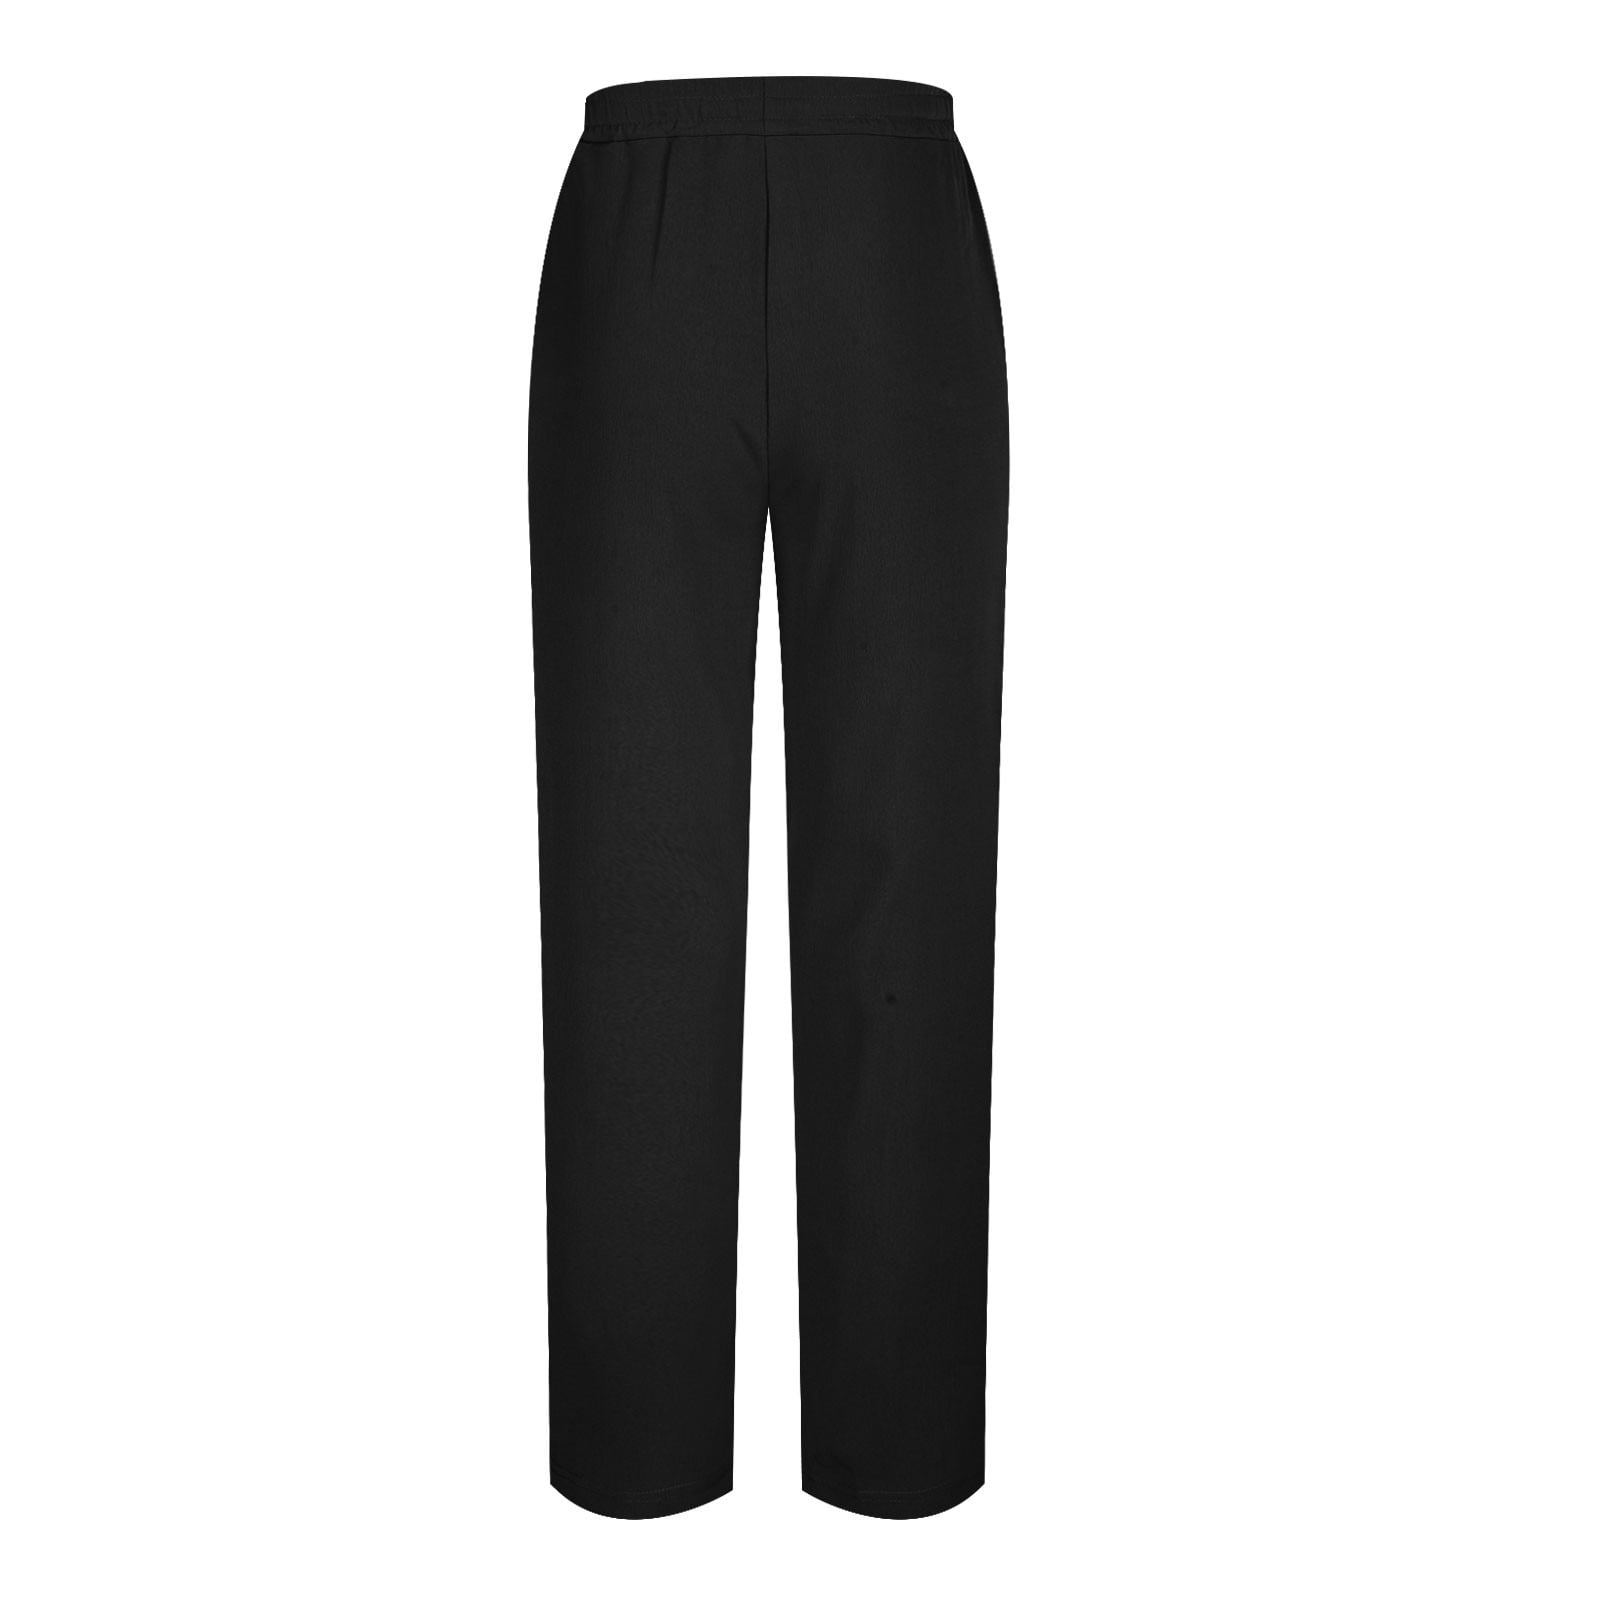 Men's Padded Trousers Cotton Trousers Casual Warm Solid Full Length  Leggings Pants Thickened Pocket Drawstring Pants Trousers 211201